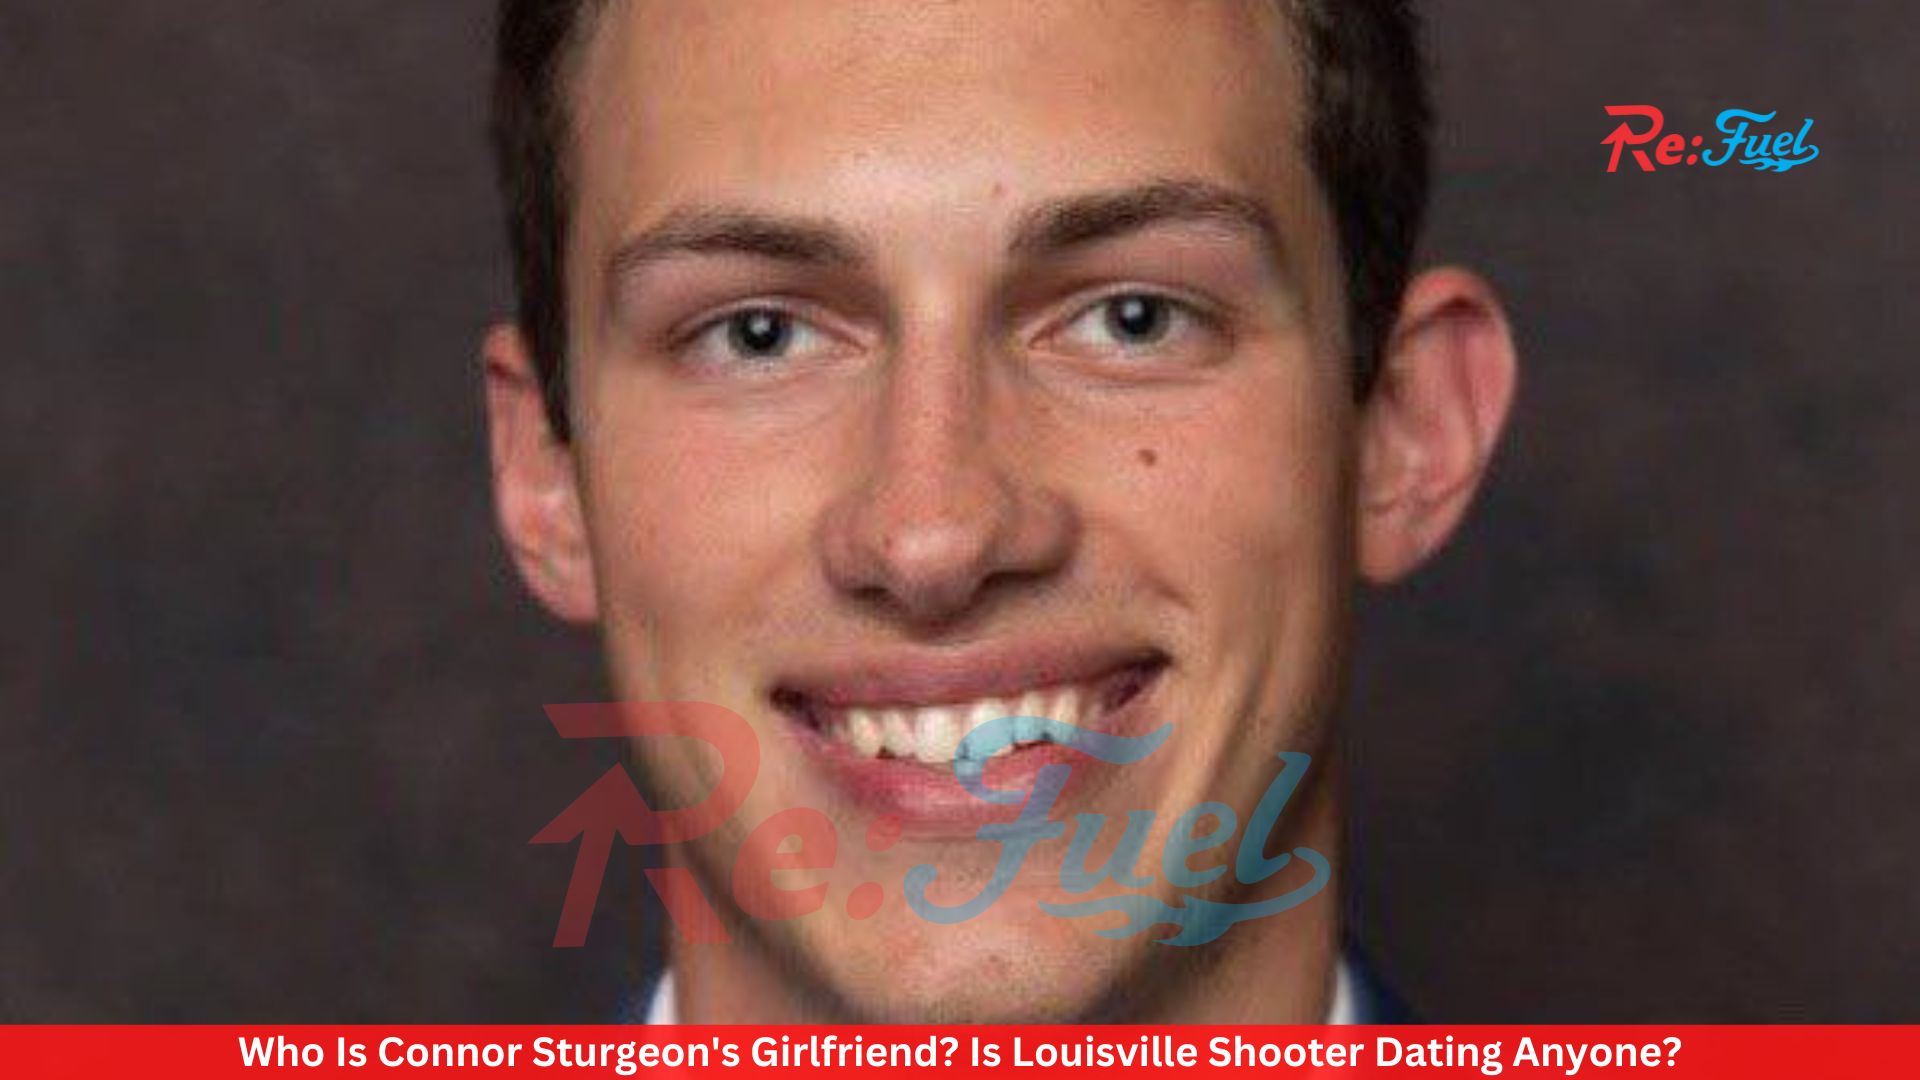 Who Is Connor Sturgeon's Girlfriend? Is Louisville Shooter Dating Anyone?